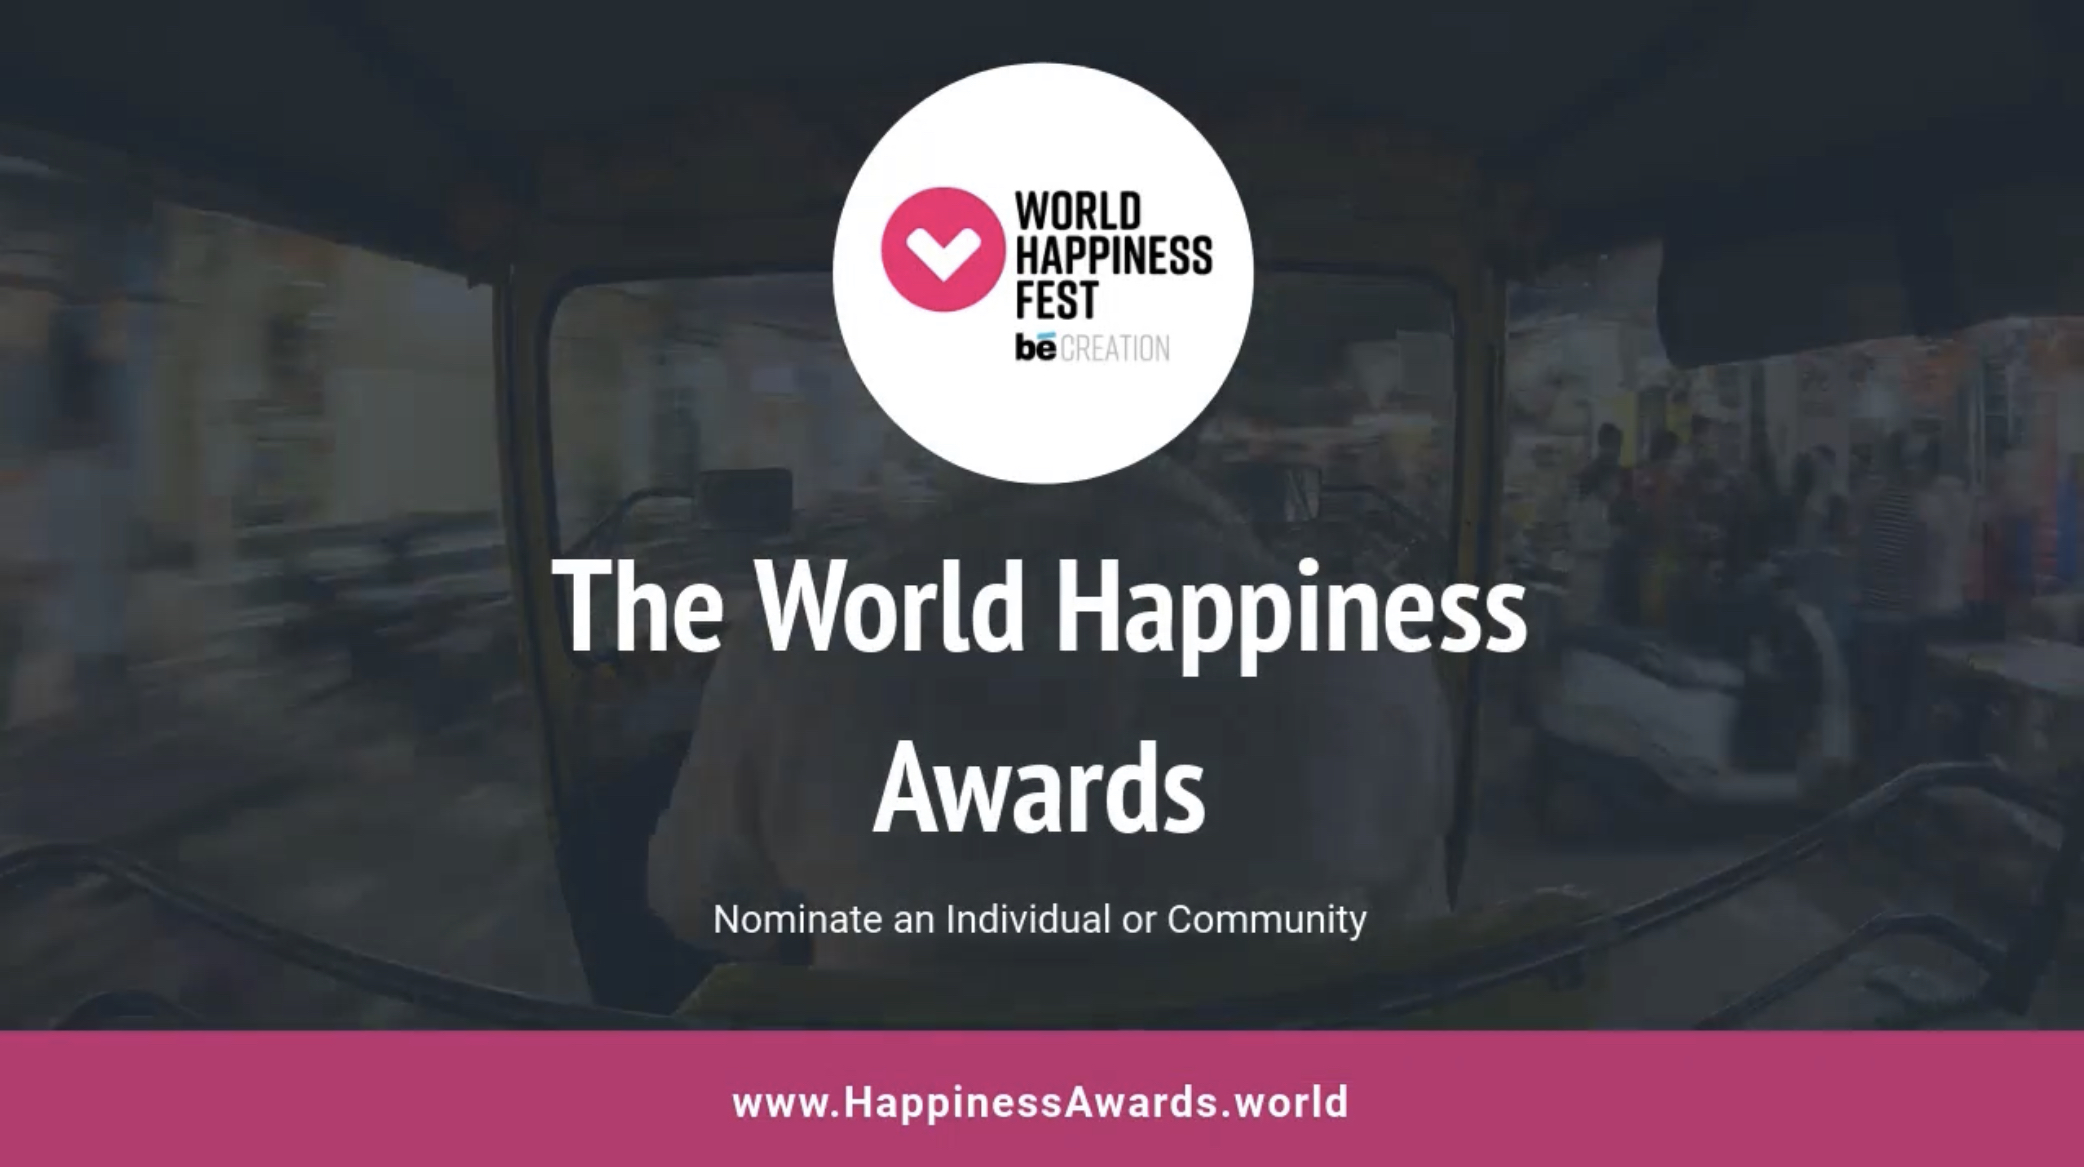 The World Happiness Awards